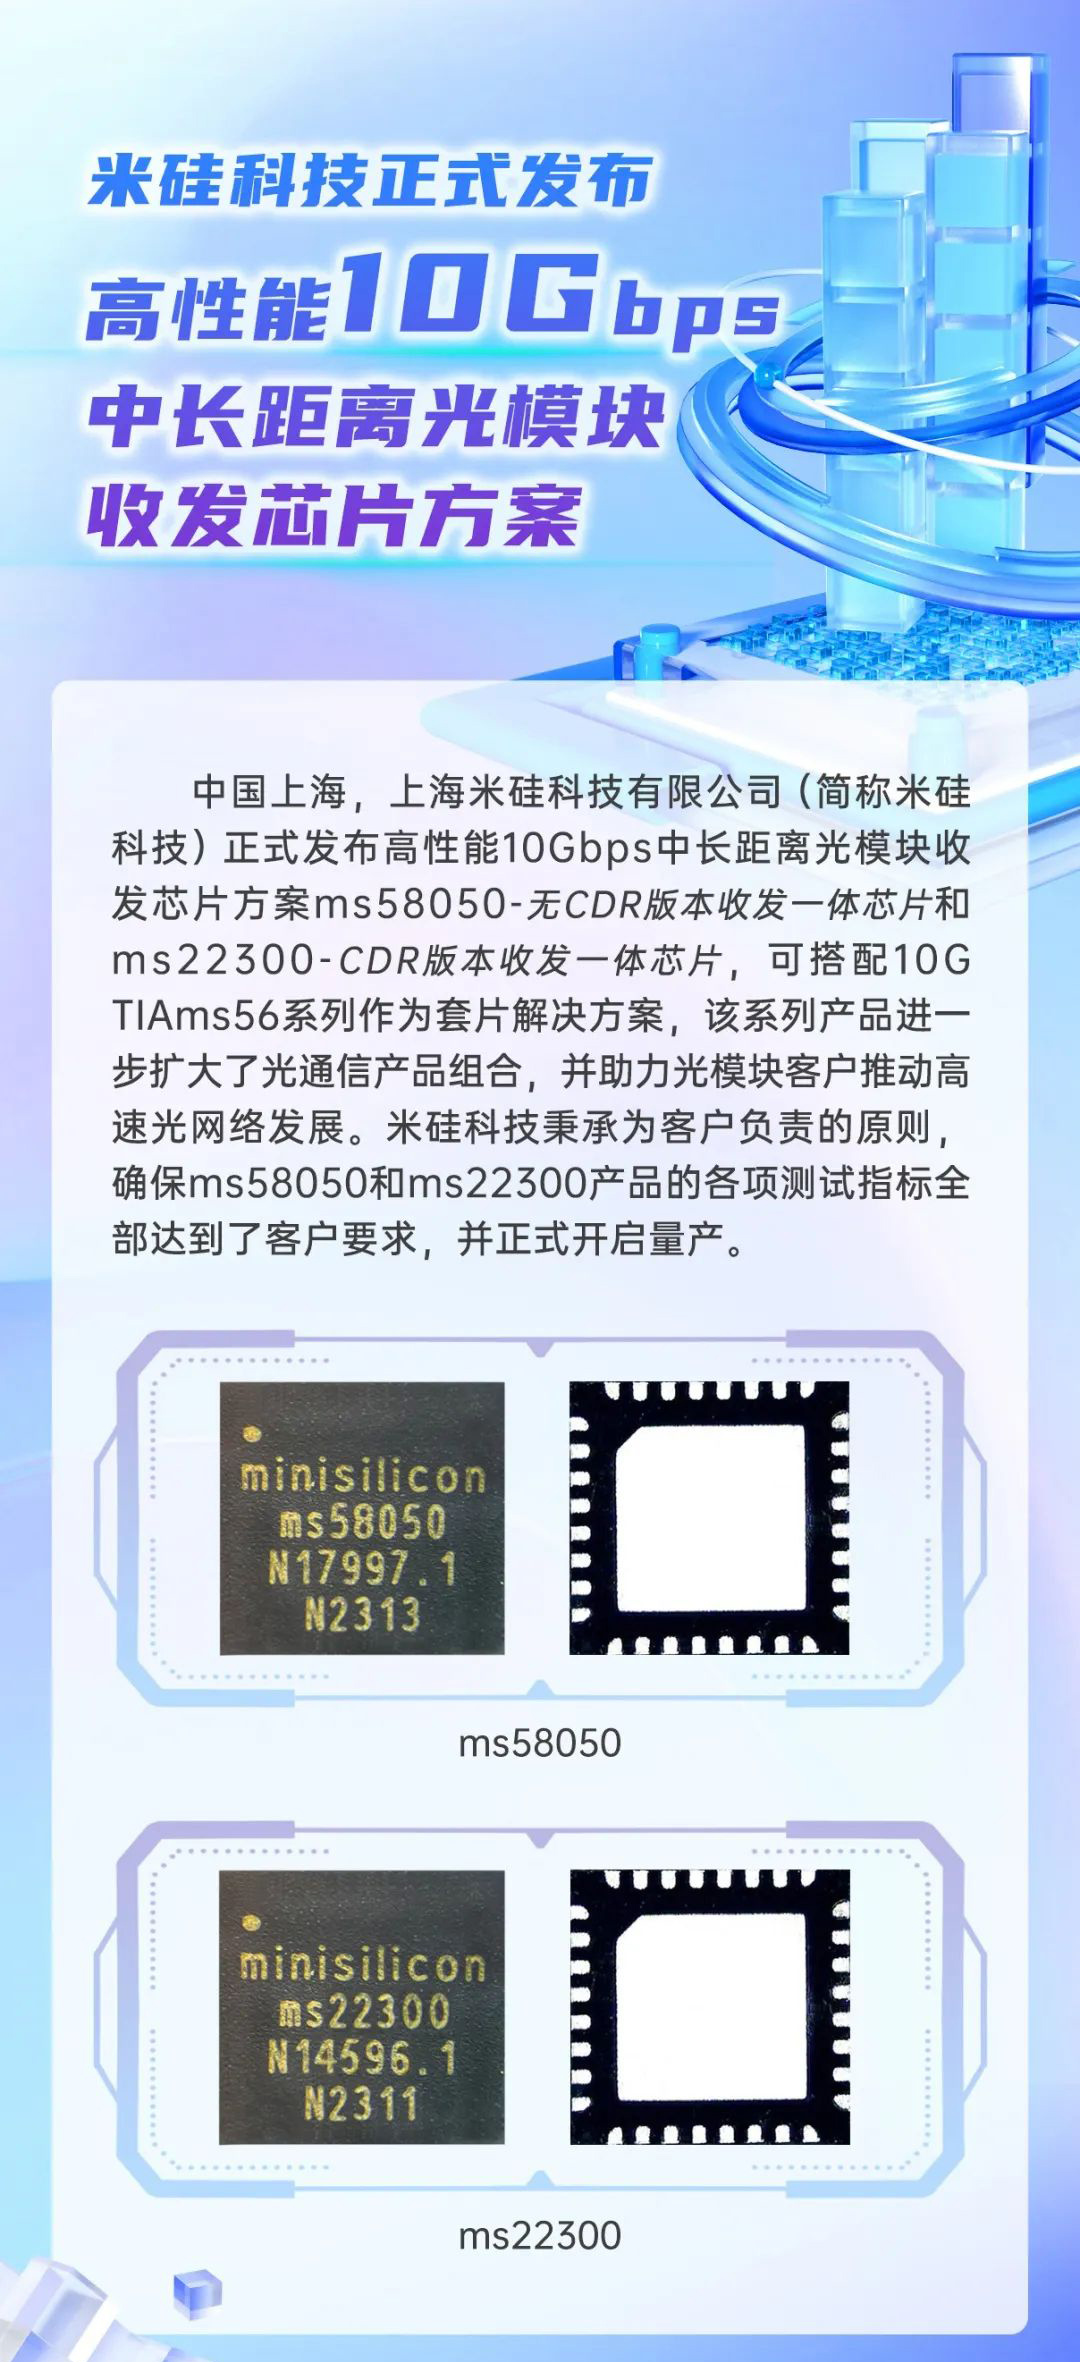 In this optical expo, minisilicon Technology also demonstrated its MCU products, with the purpose of